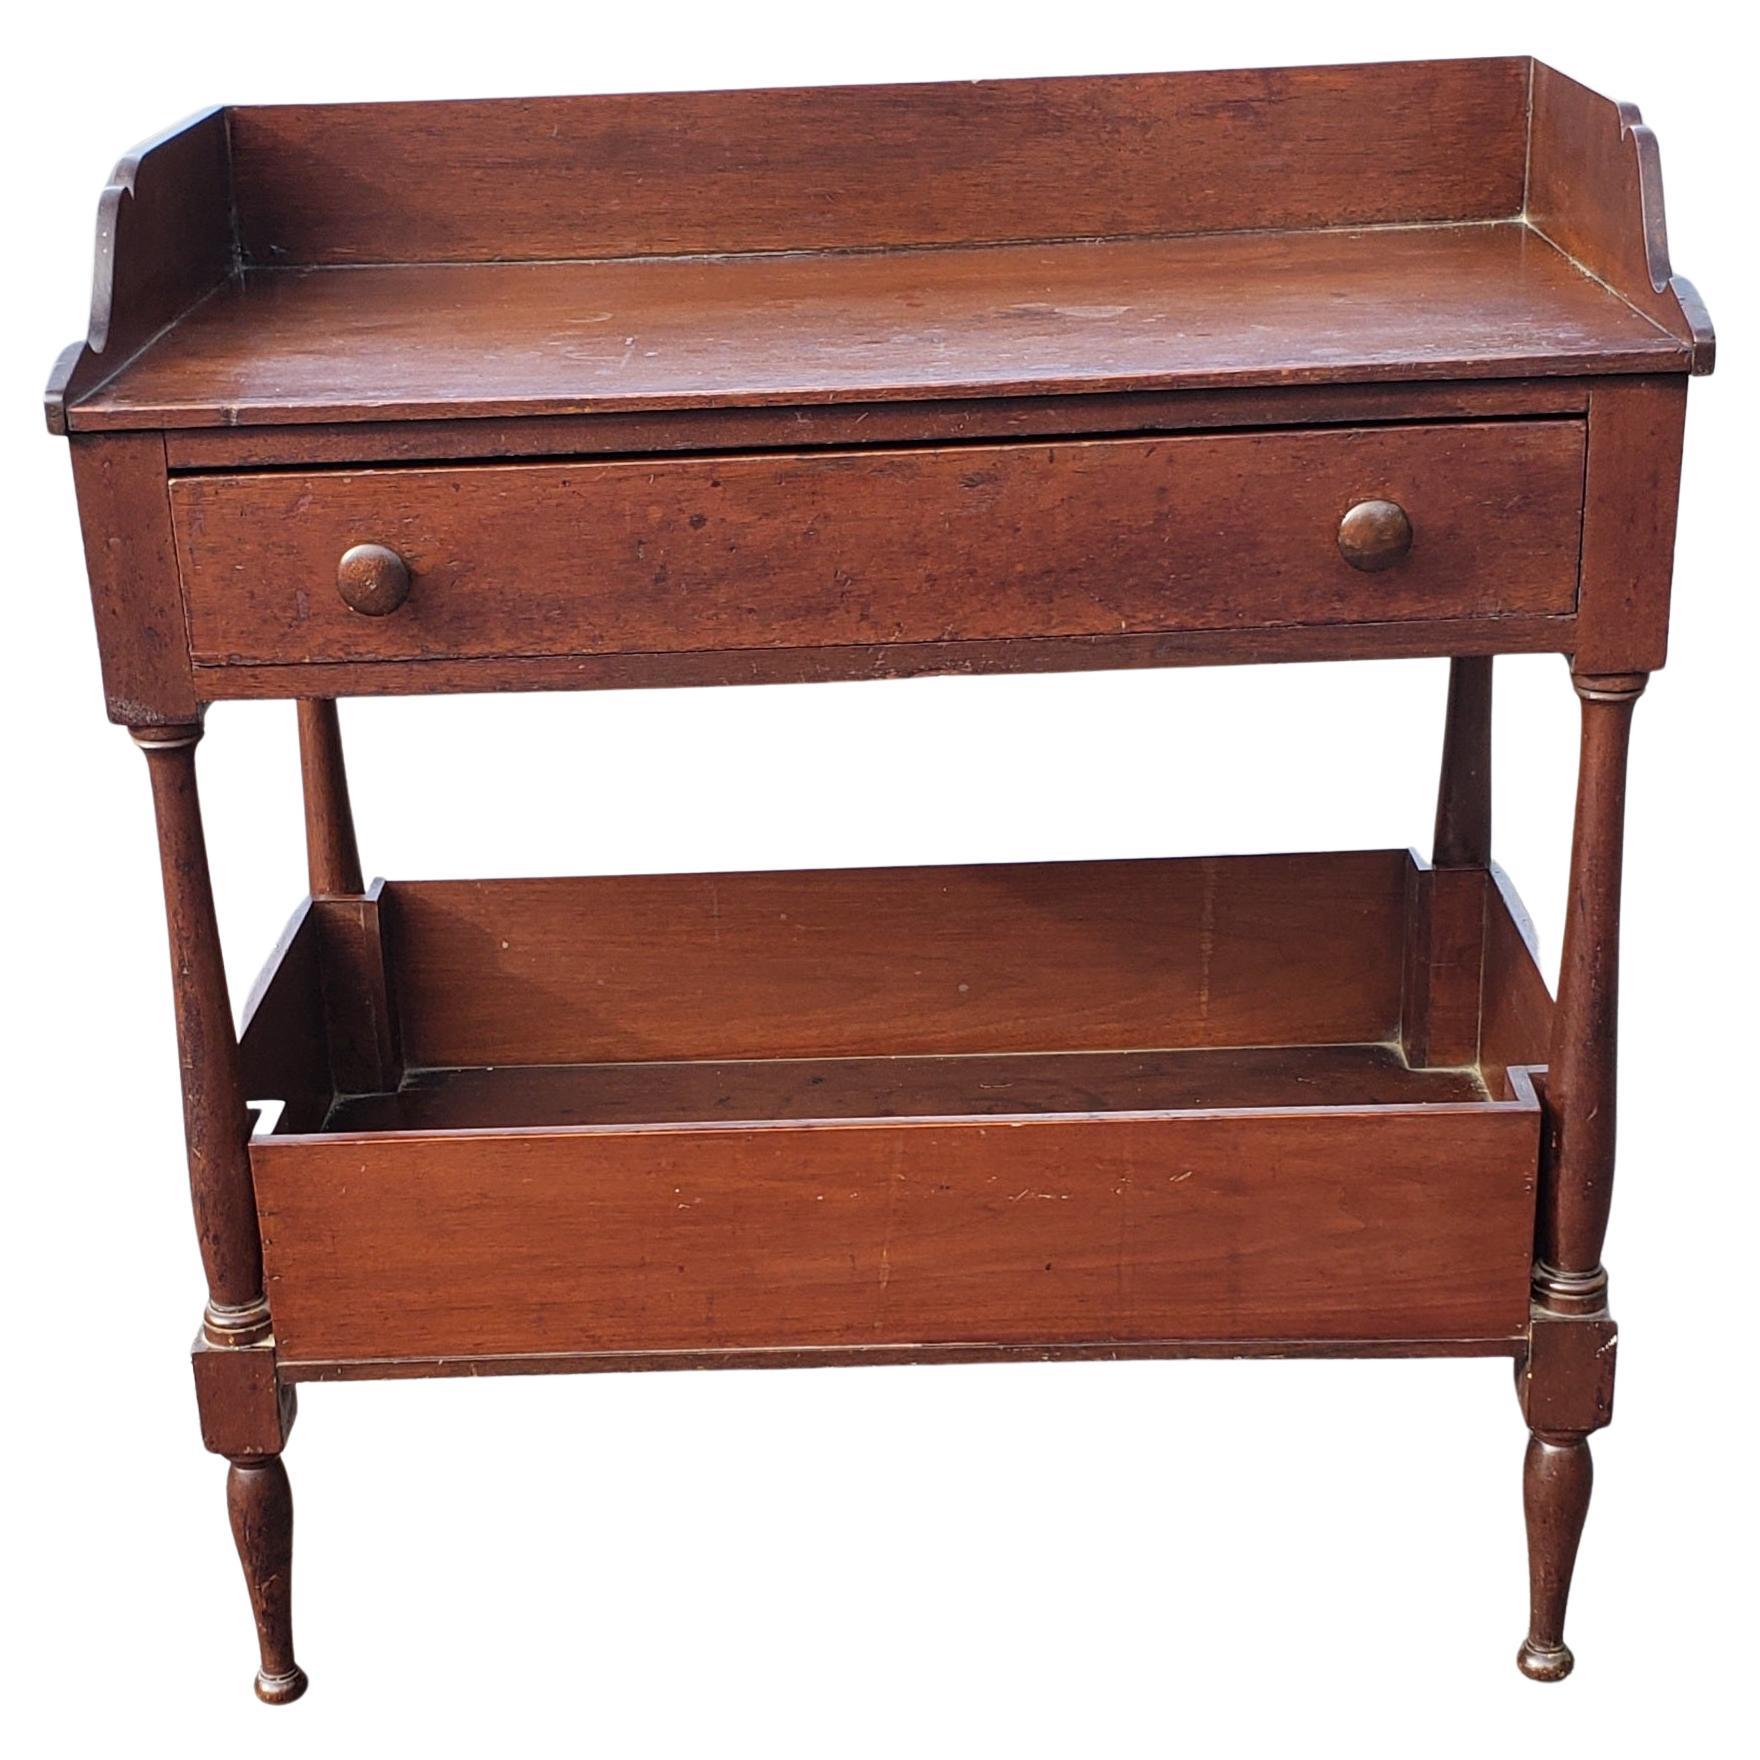 19th Century Walnut Tiered Washstand or Work Table with Drawer and Open Storage For Sale